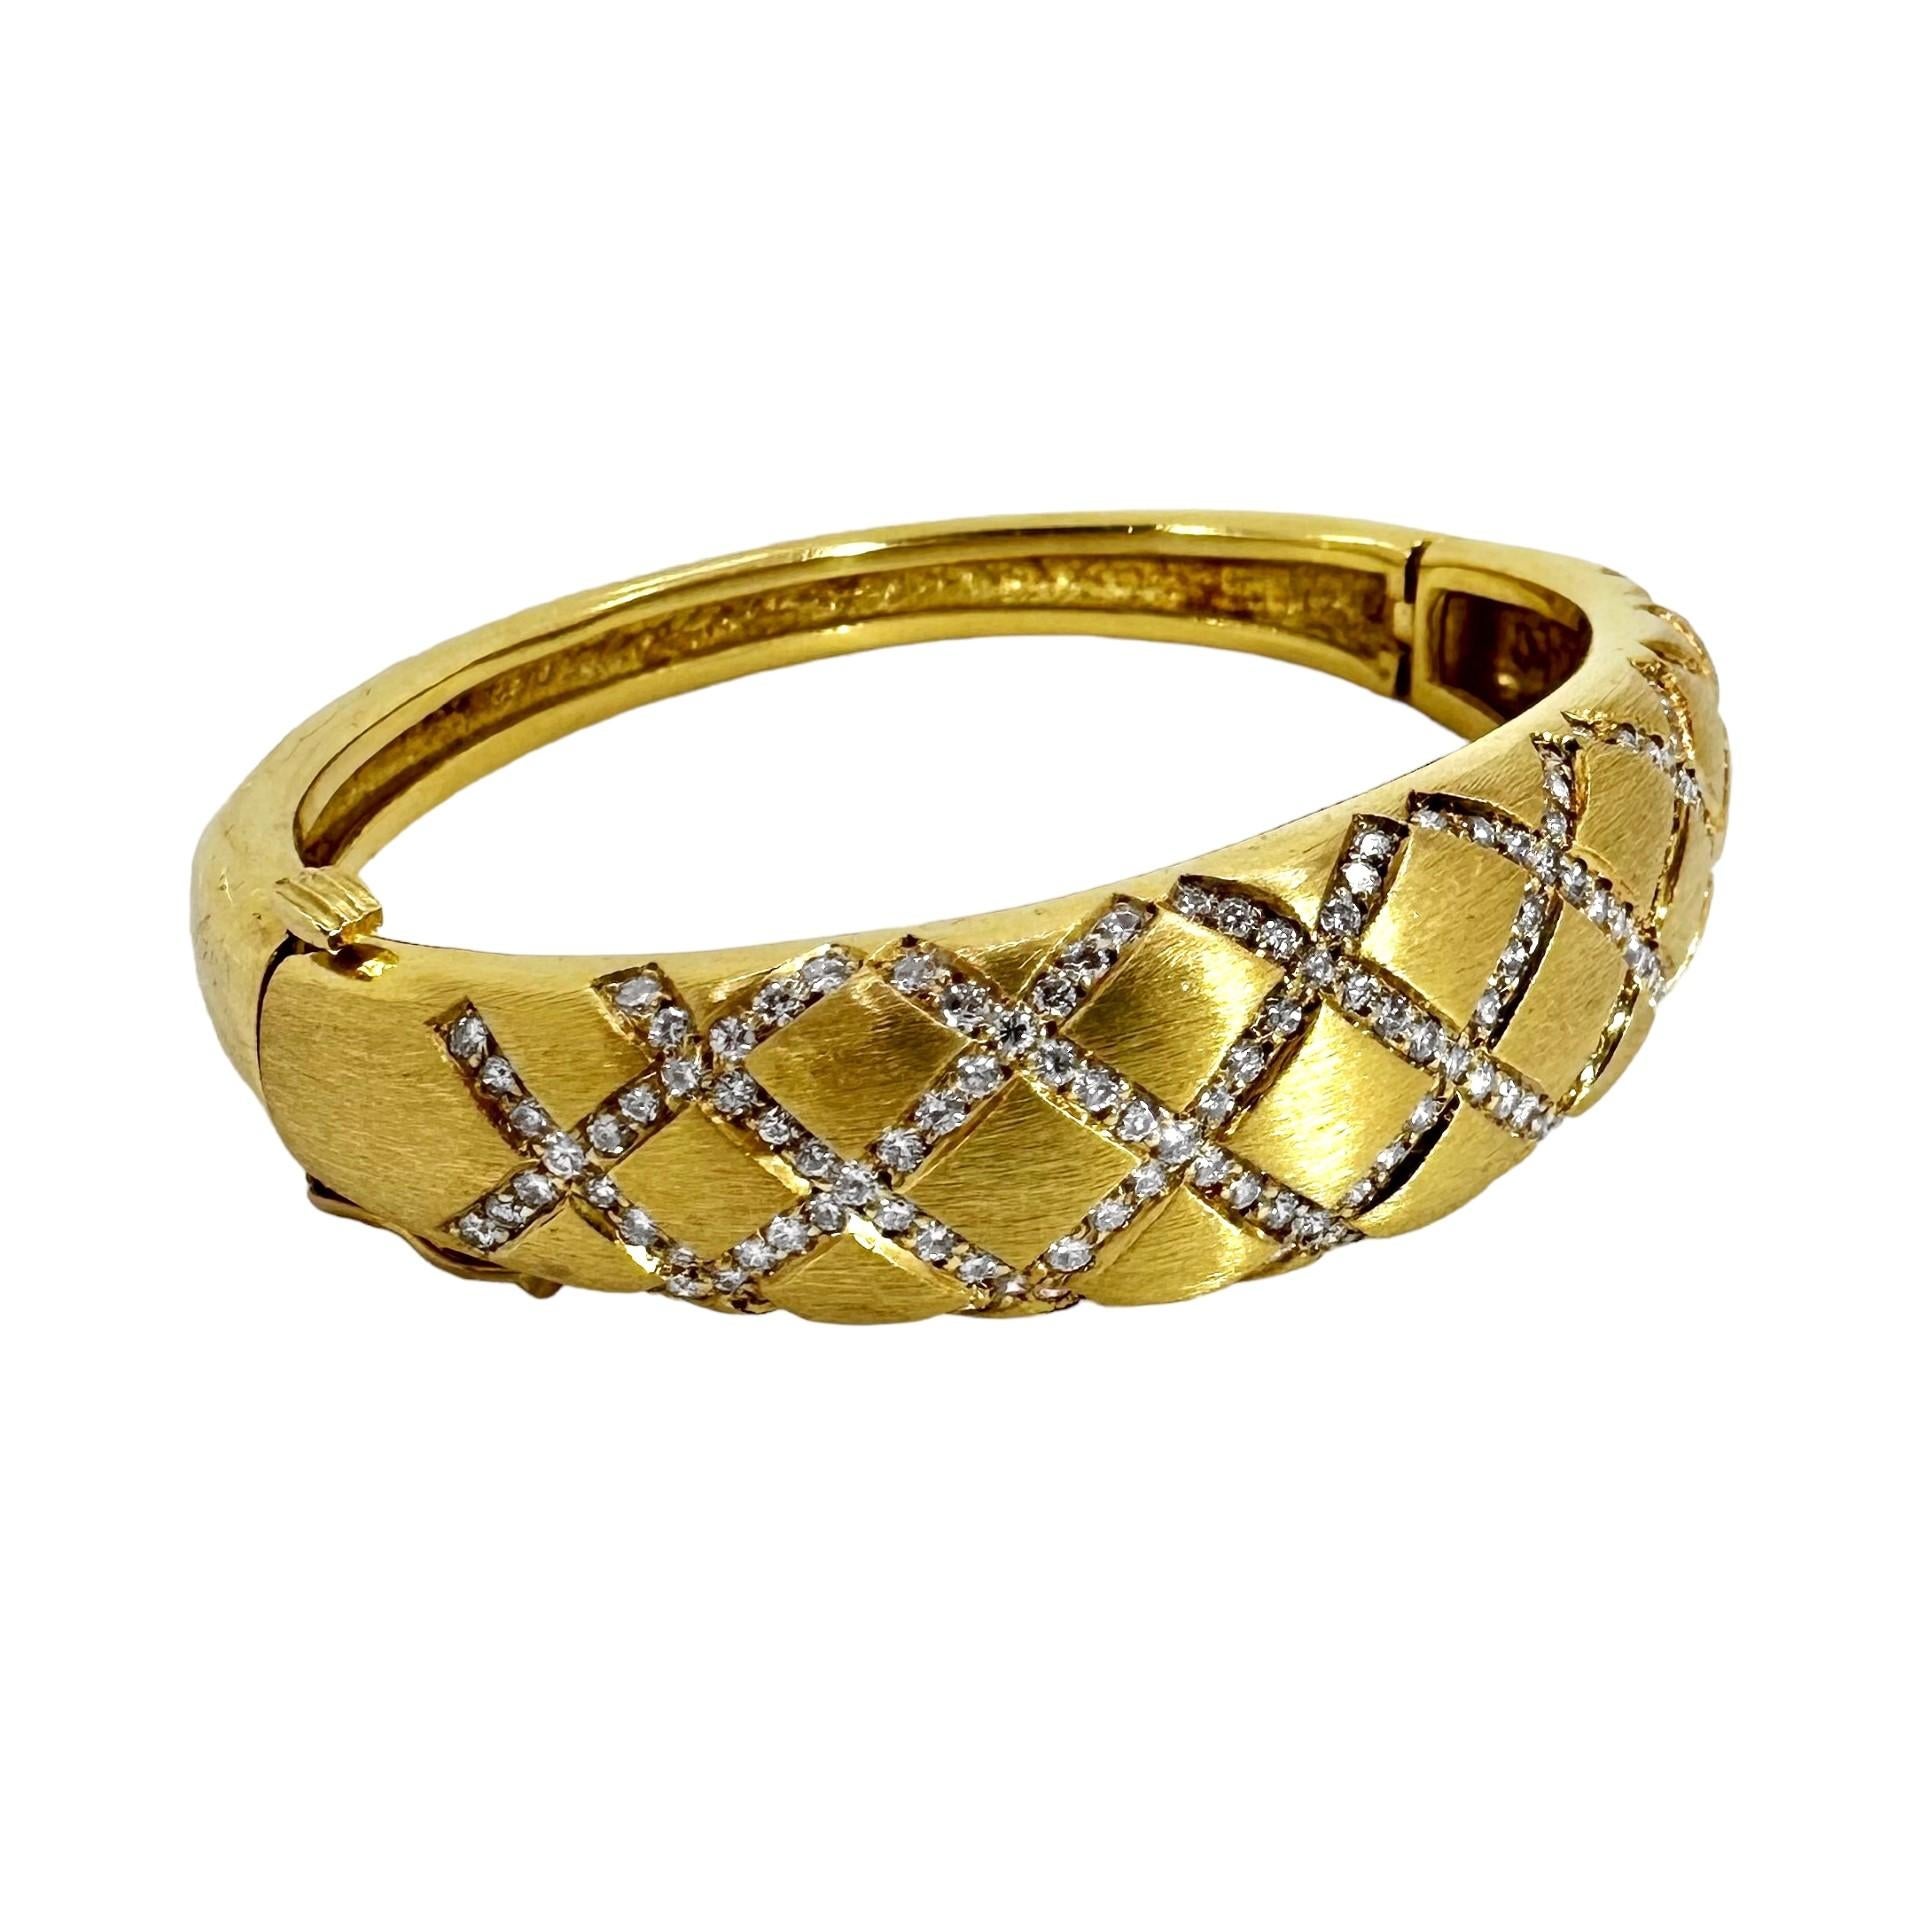 Le Triomphe 18K Yellow Gold and Diamond Quilted Design Bangle bracelet For Sale 1